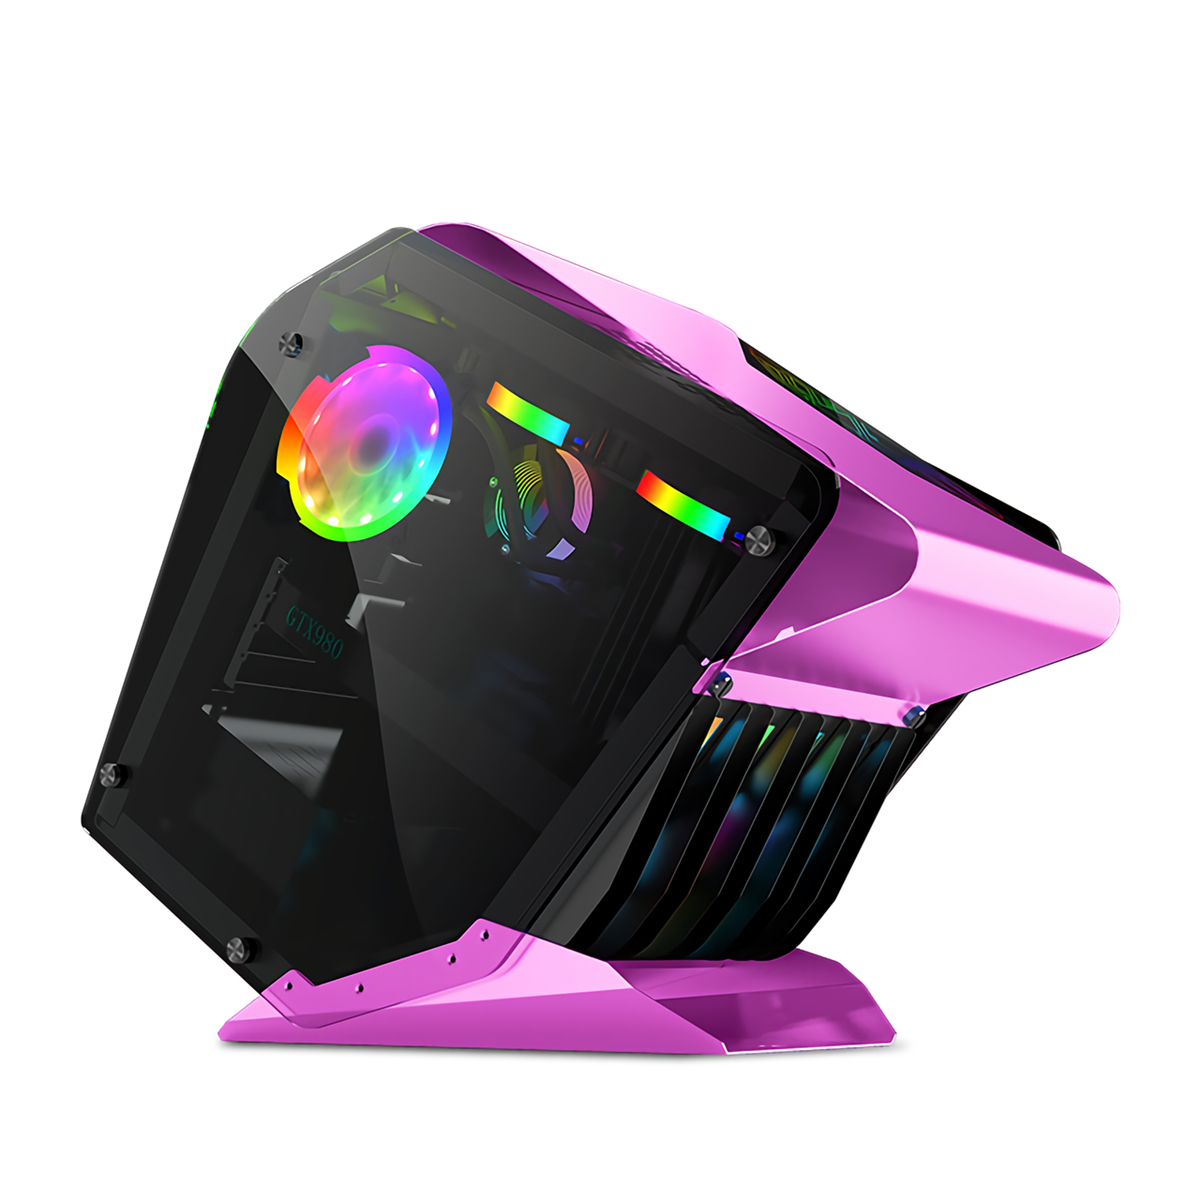 EVESKY-Little-Monster-RGB-Computer-Case-CPU-M-ATX-Water-Cooling-Double-sided-Transparent-Glass-Gamin-1806503-8